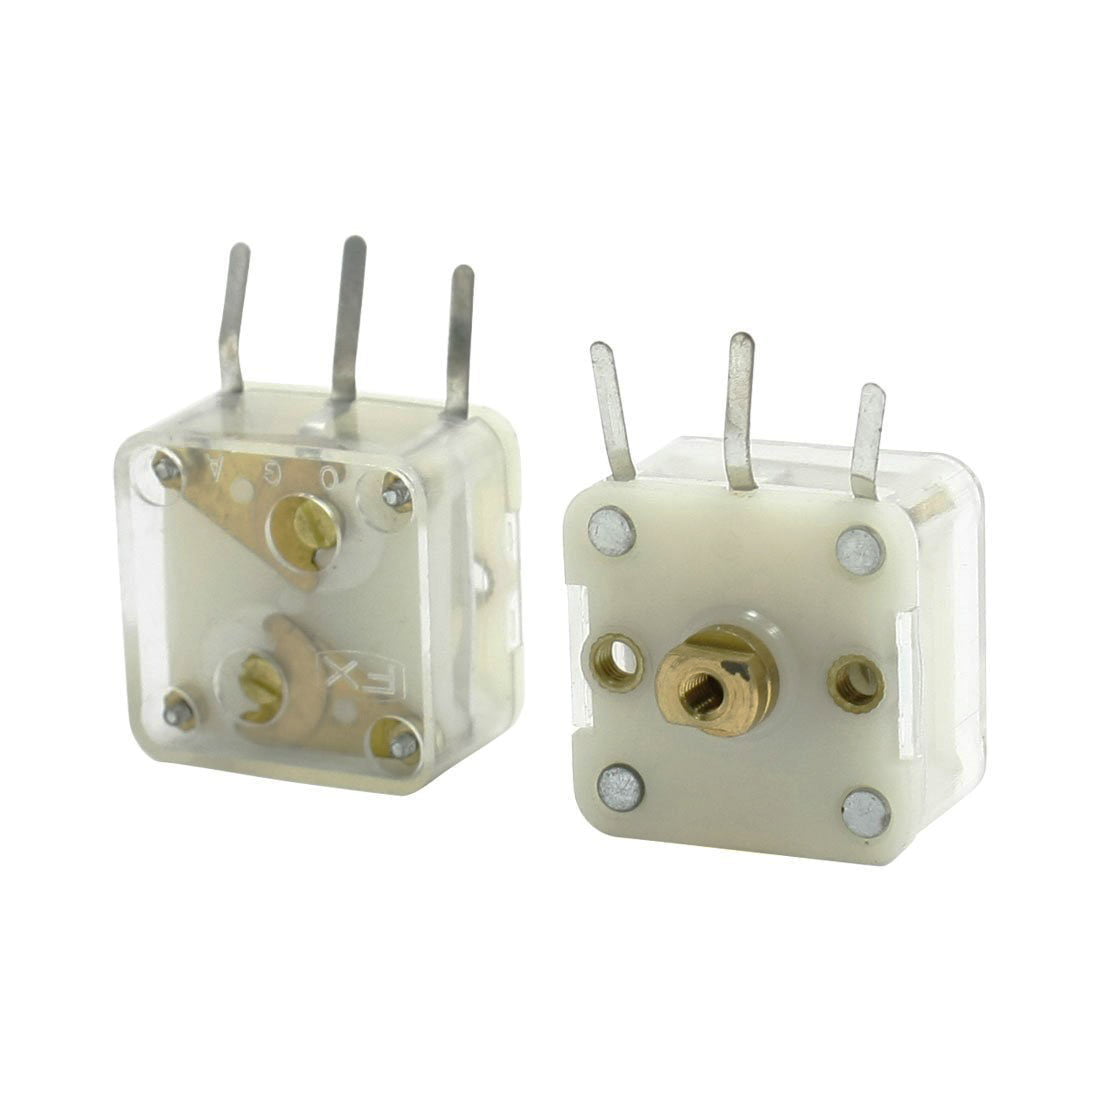 Senmubery 2 Pcs 223F Style Dual 20pF Variable Capacitor for FM Radio